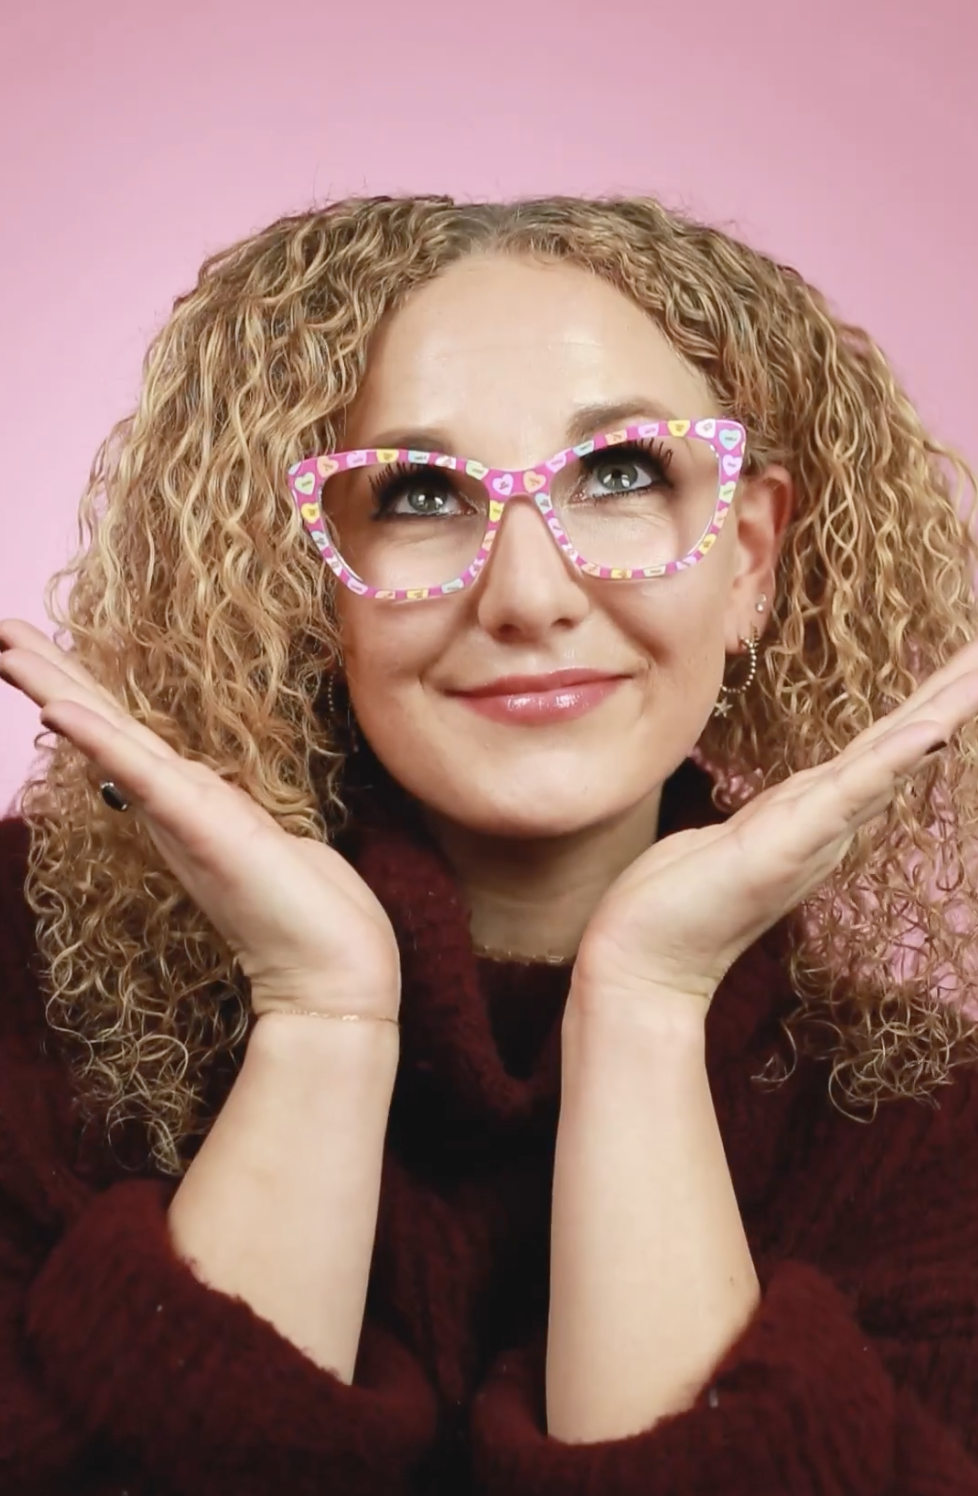 person with their hands open framing their face and the pair eyewear candy heart design frame on